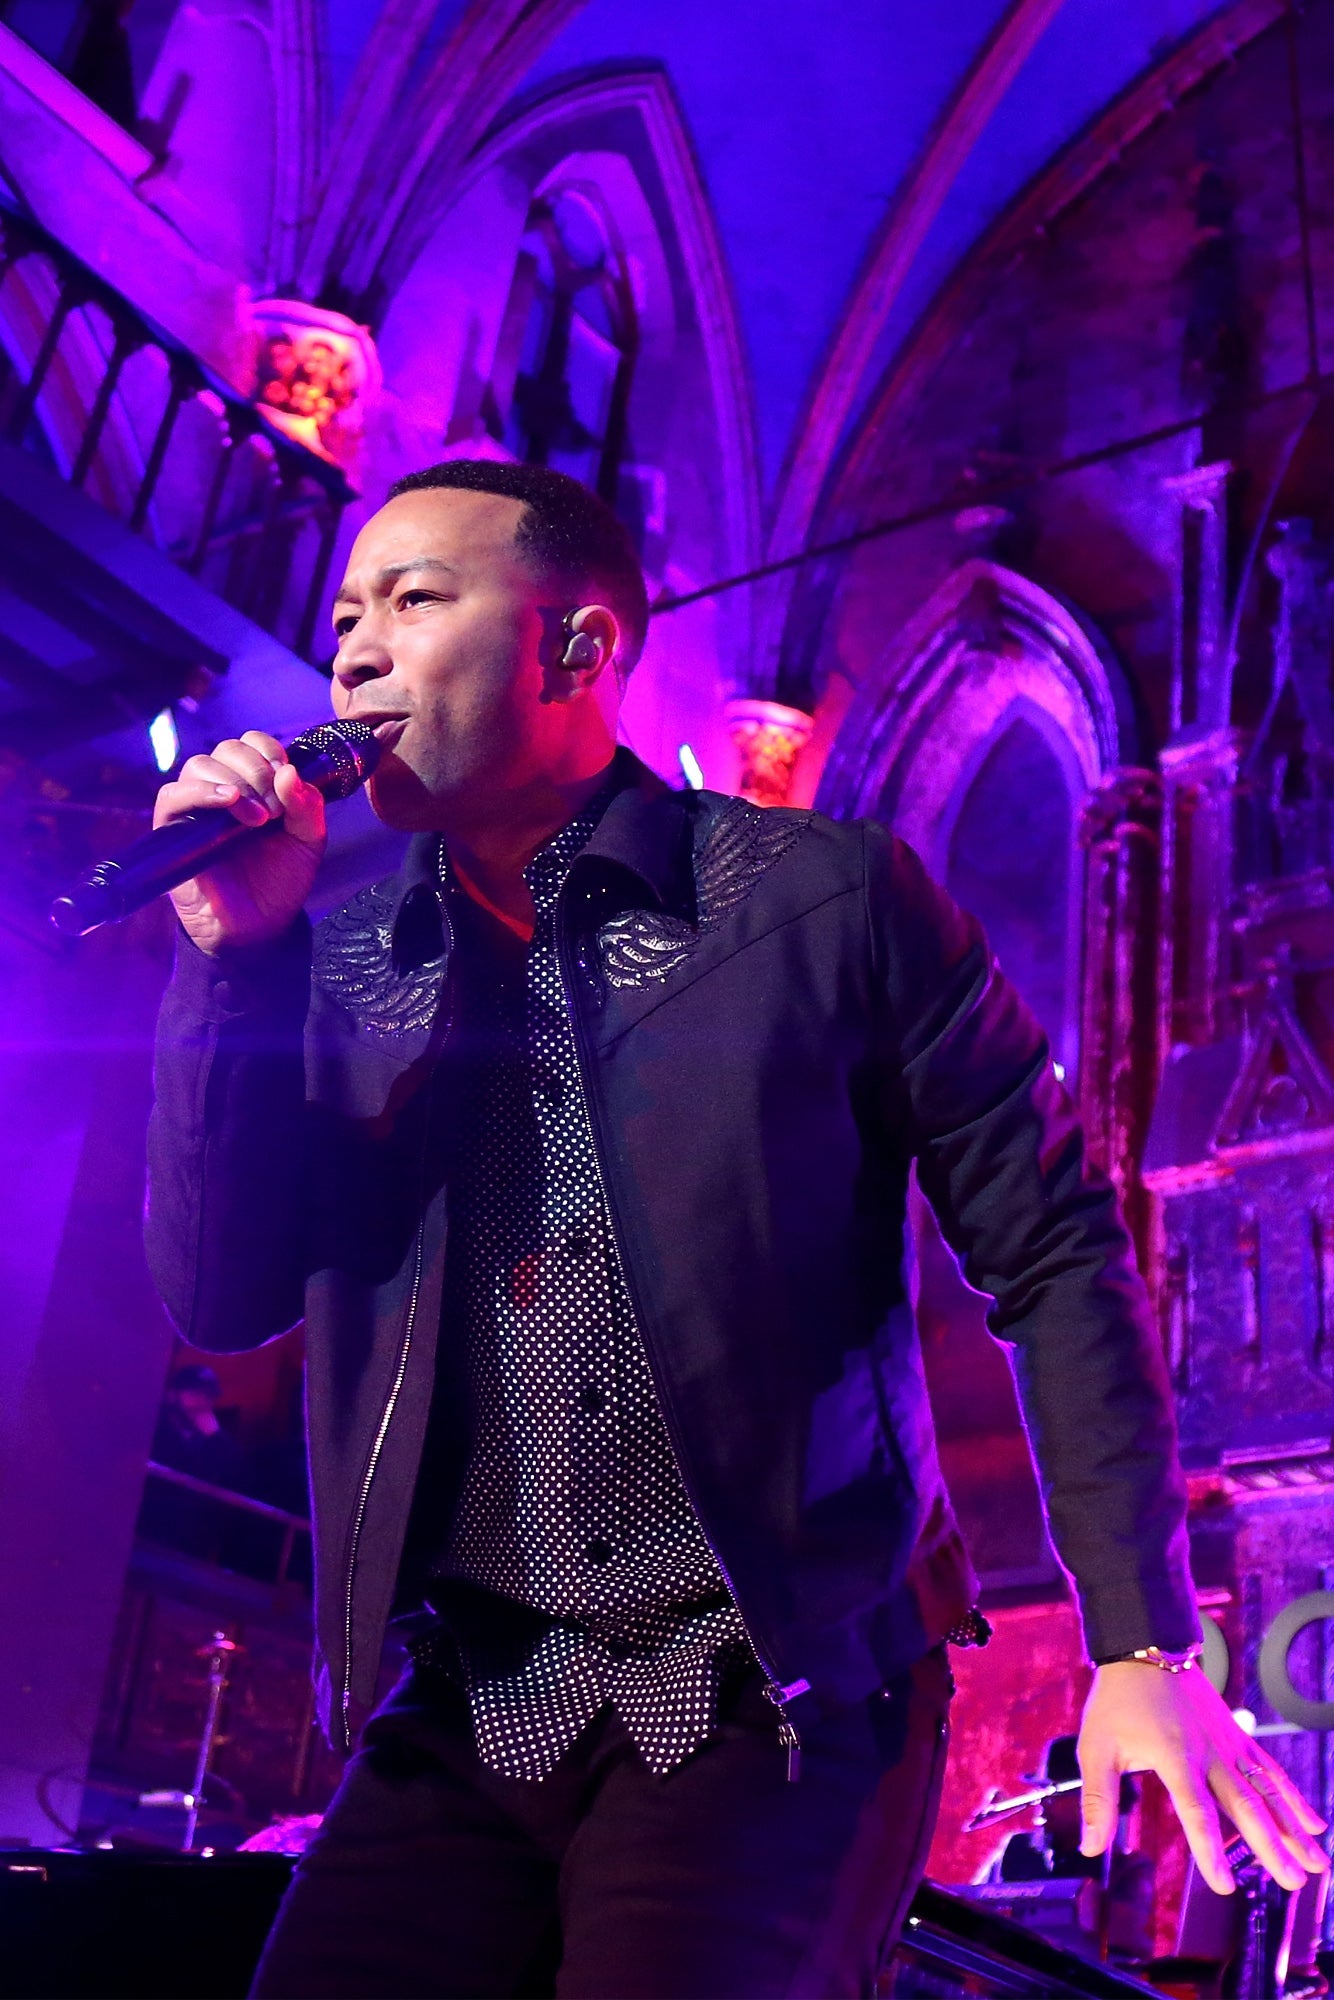 John Legend's Live Performance Of 'Surefire' Has Us Counting Down To ESSENCE Festival 2017 Already!
